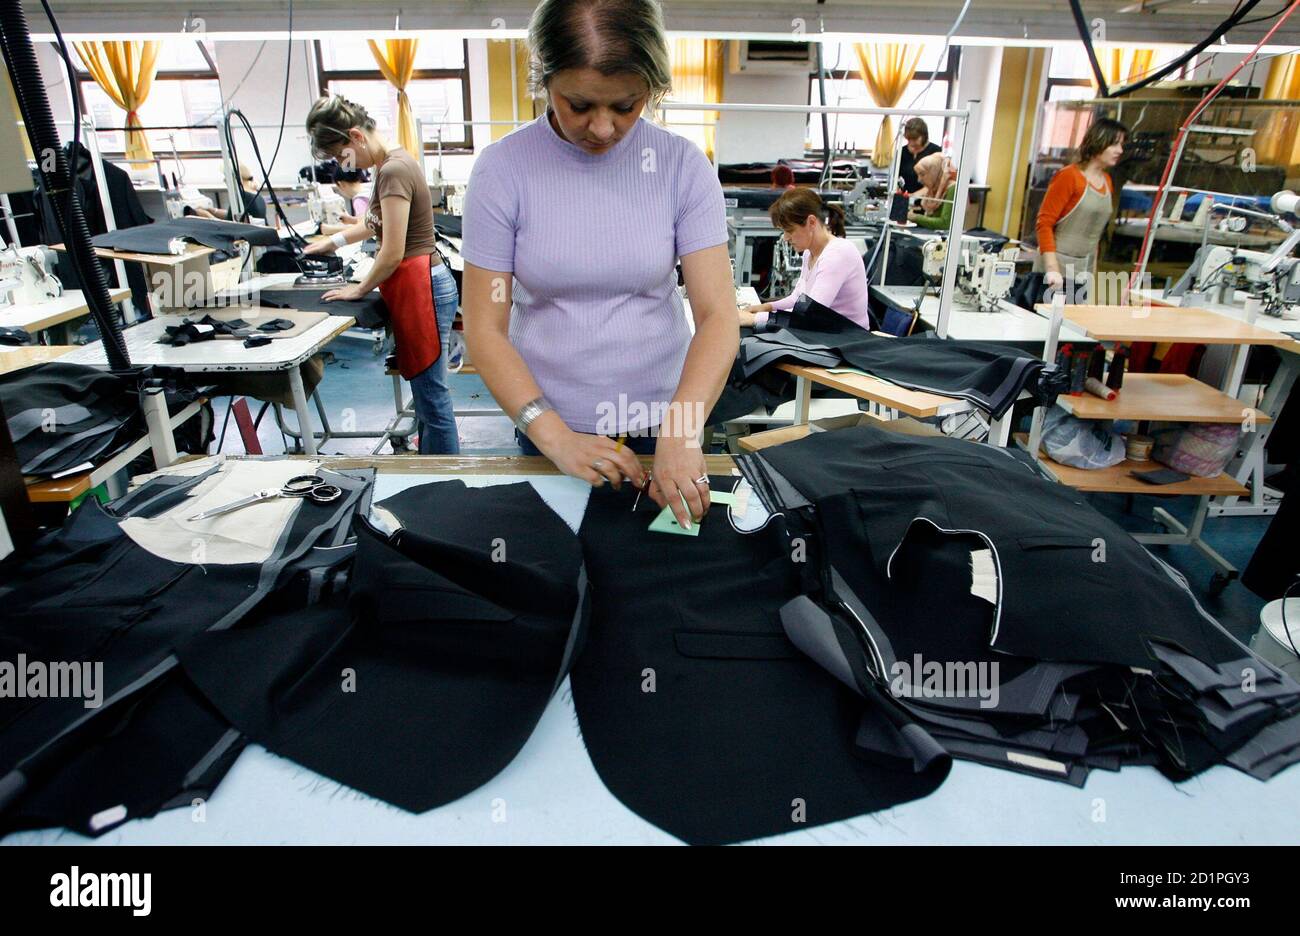 A Bosnian worker arranges clothing in the Borac garment maker in the  central town of Travnik June 3, 2009. The factory assembles clothing for  labels such as Hugo Boss, Pierre Cardin and